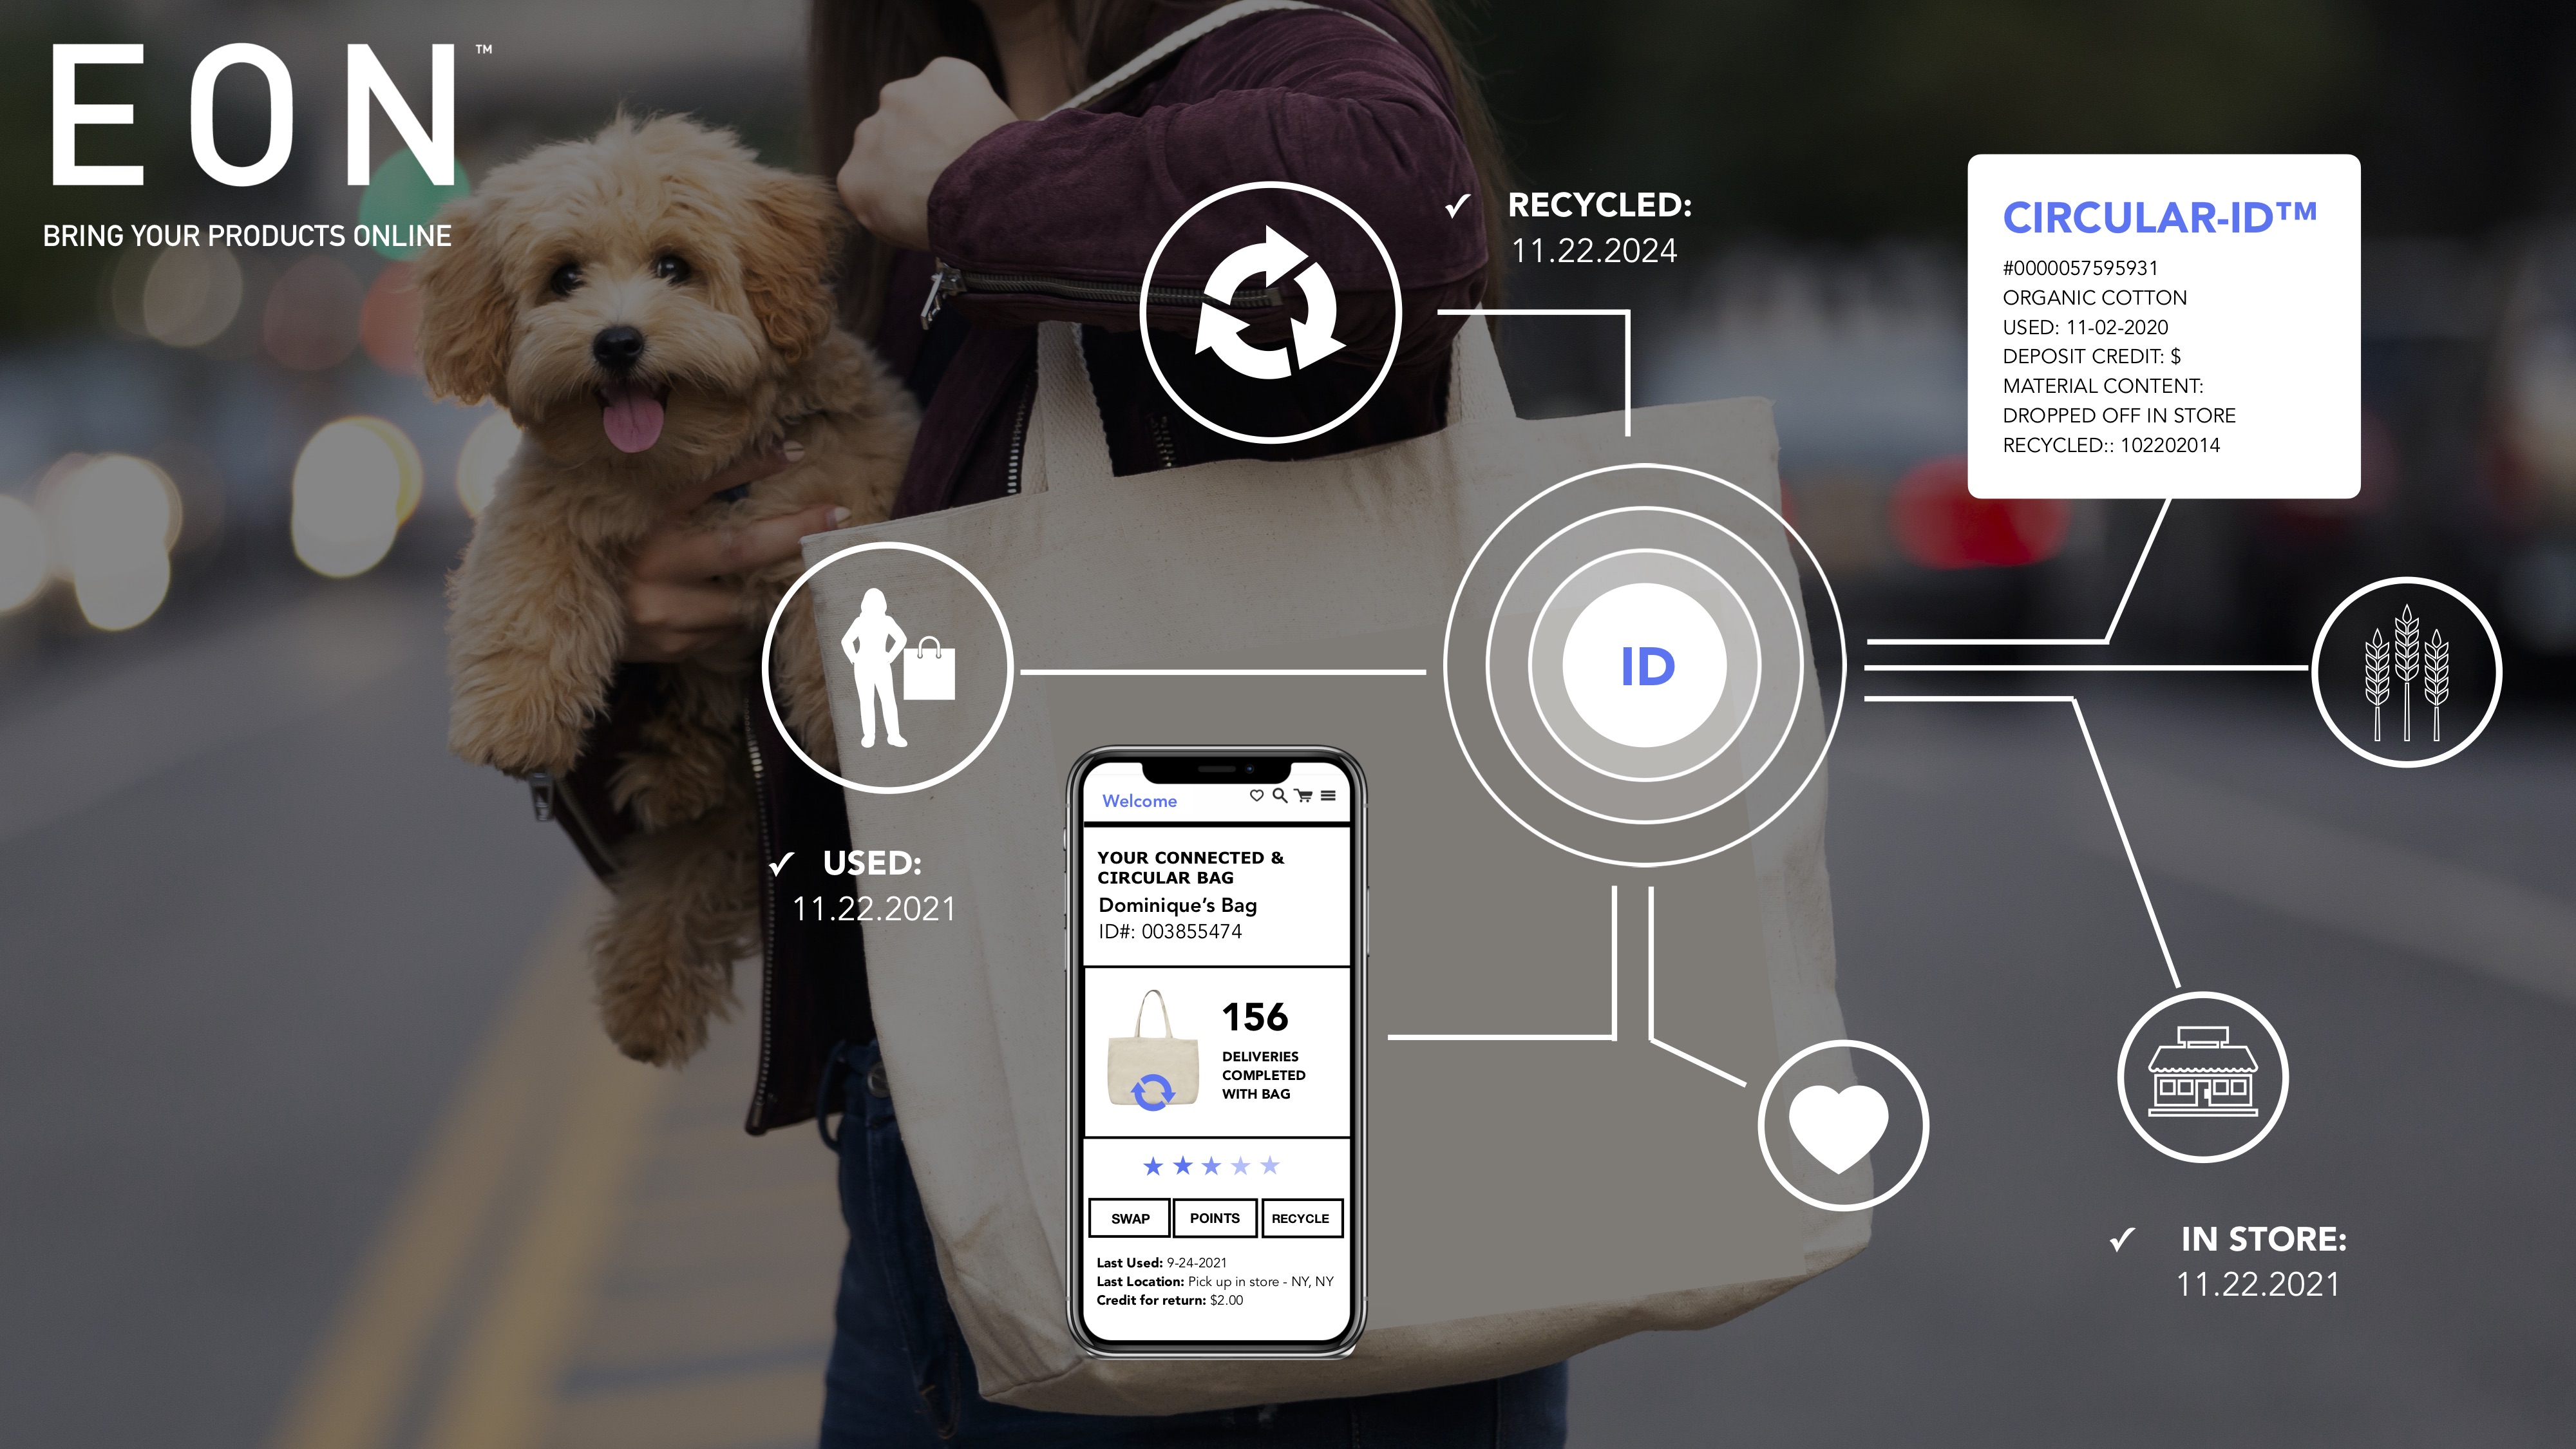 Text on image: EON Bring your products online and a concept map showing the Circular-ID at center with lines pointing to Recycled 11.22.2024, &In Store 11.22.2021, Used 11.22.2021 and a mock-up of an iPhone app.